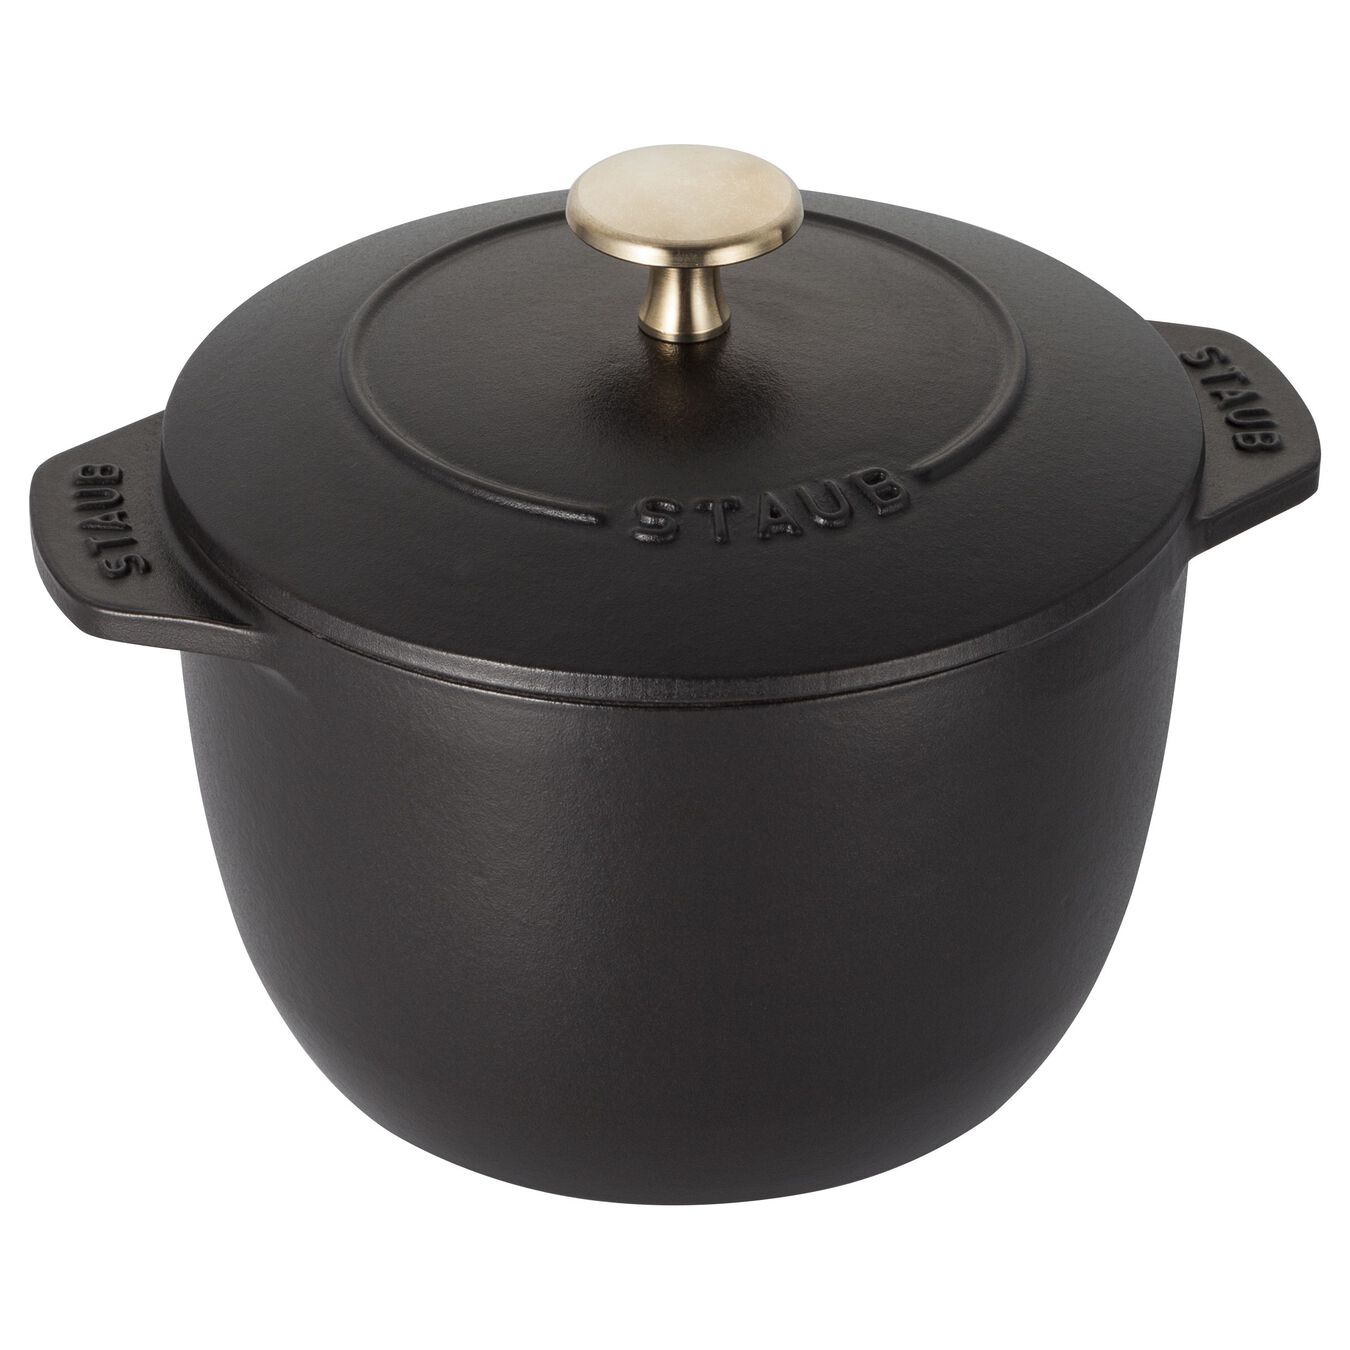 An Expert Guide to Staub Dutch Ovens & Cocottes